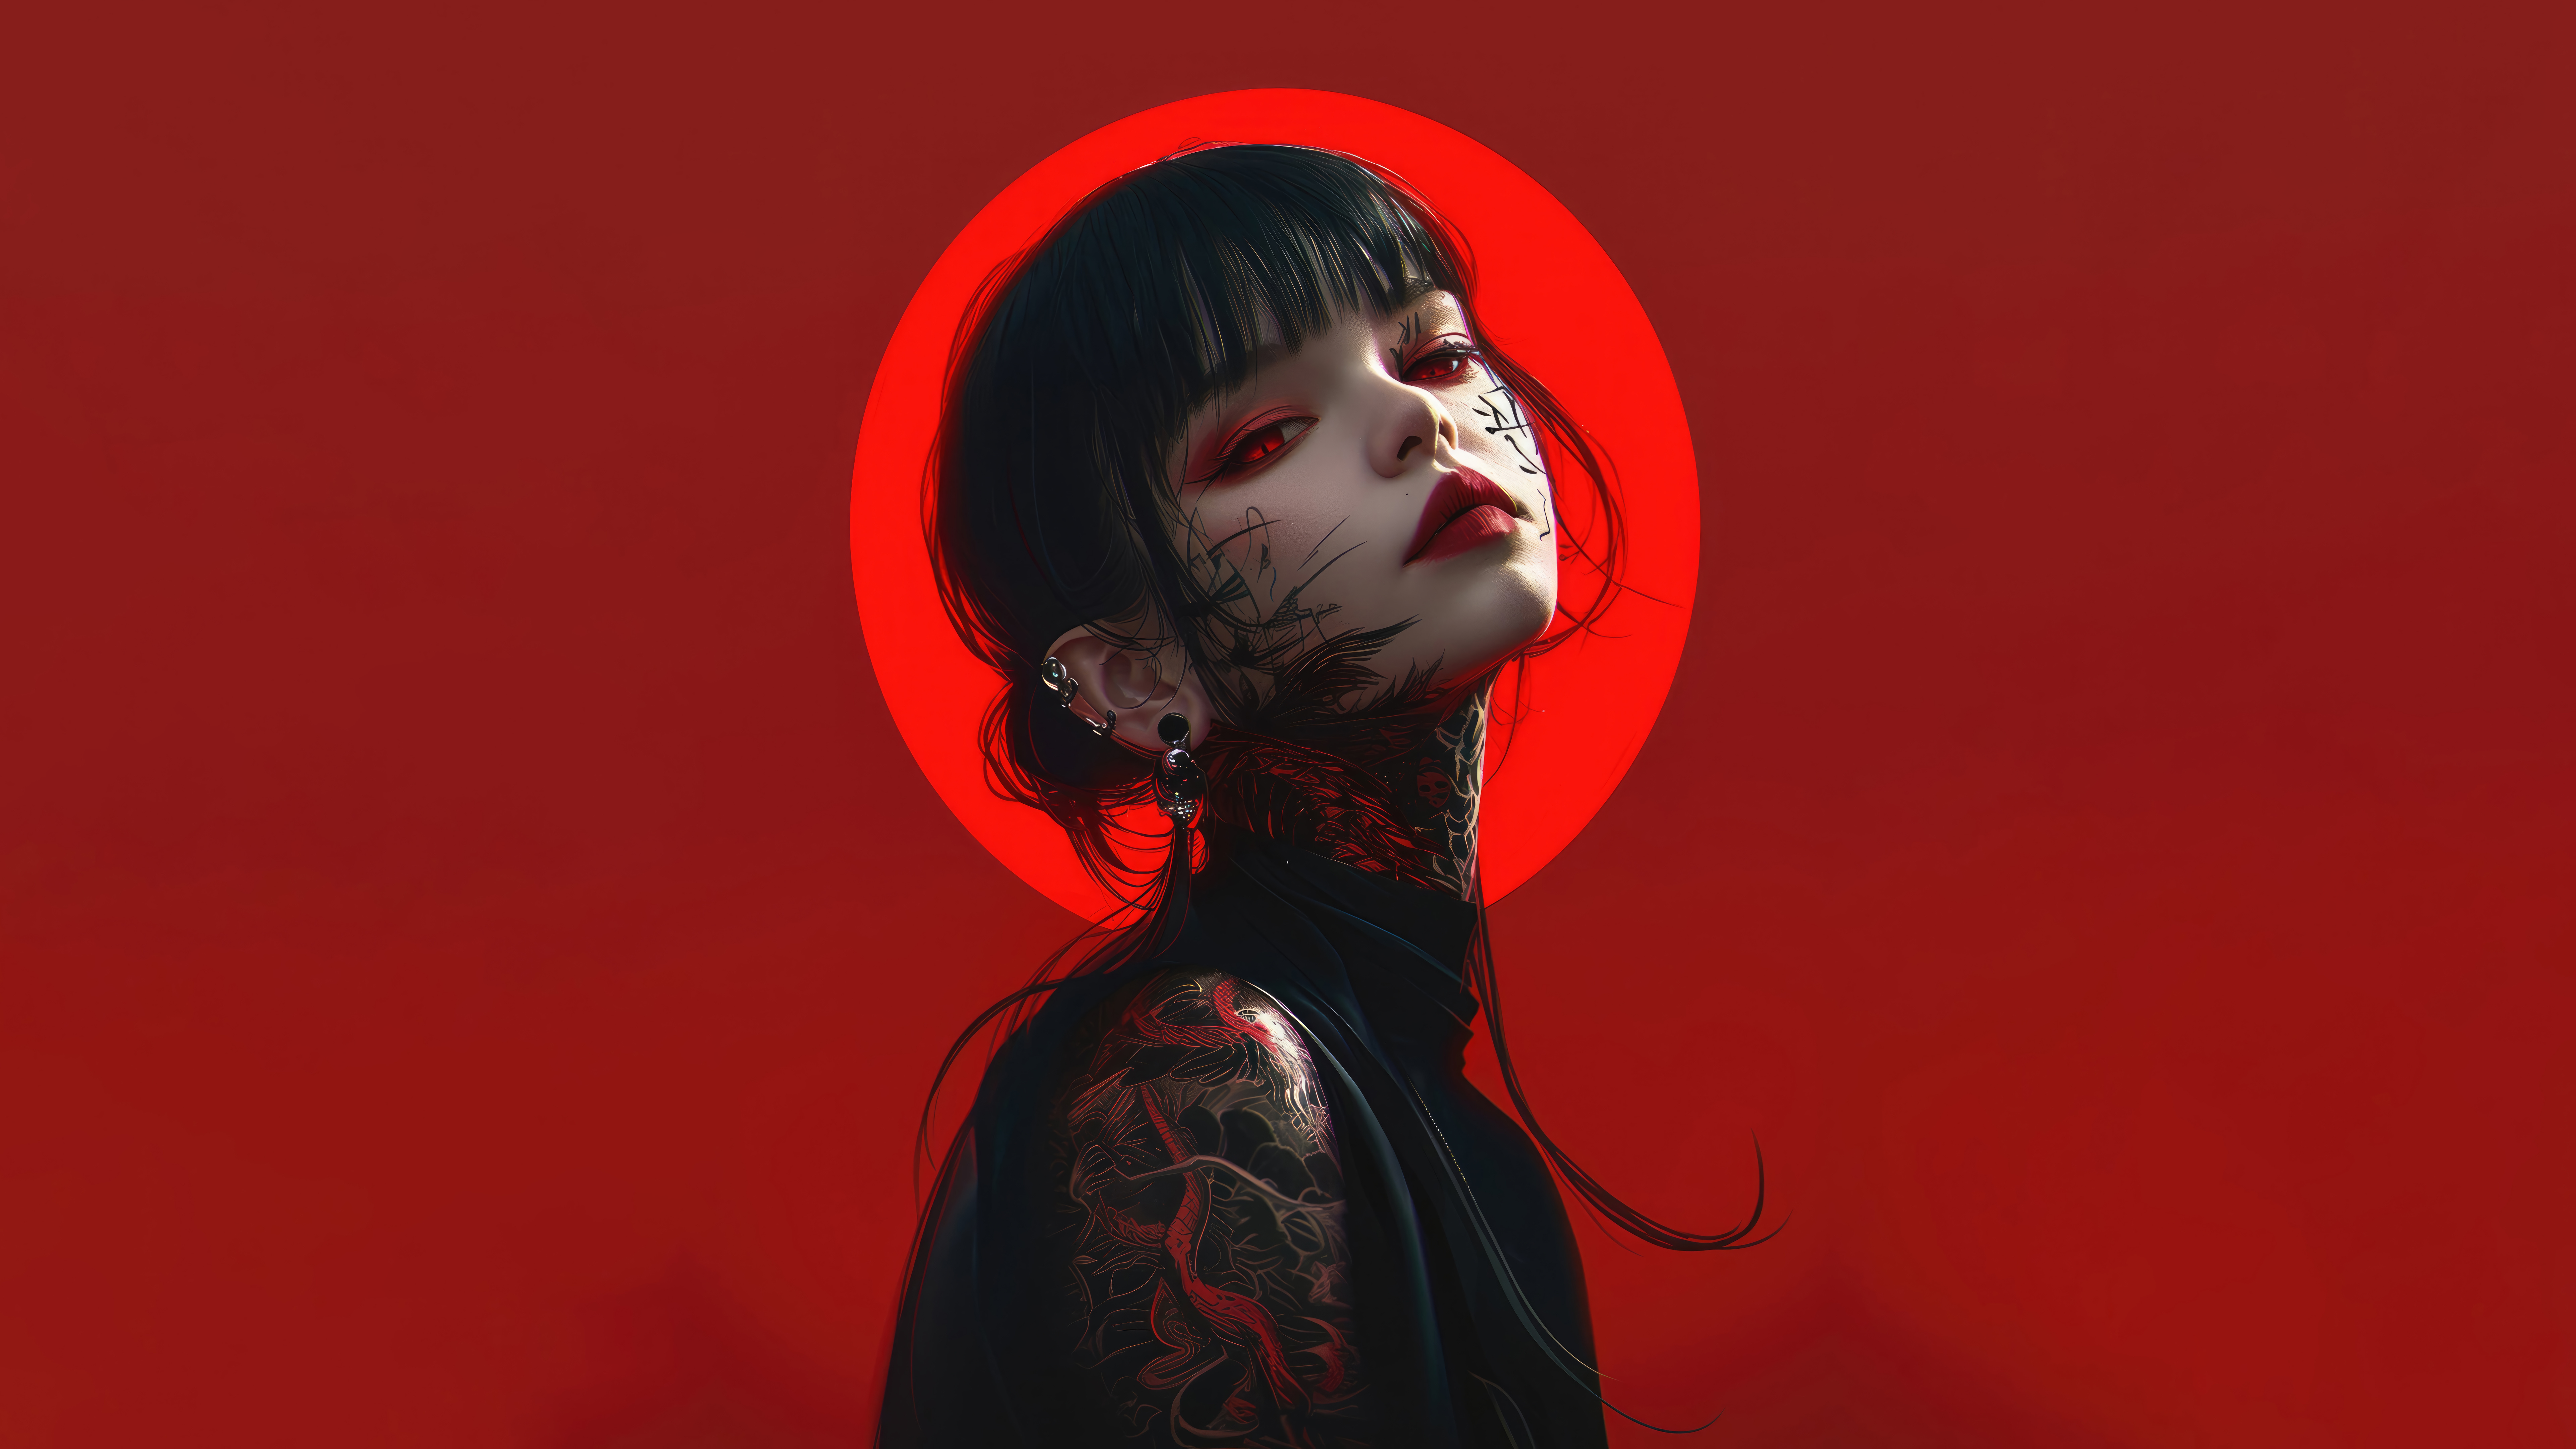 Anime 7680x4320 anime anime girls artwork concept art digital art digital glowing black clothing red red background AI art red eyes looking at viewer dark hair red lipstick tattoo earring